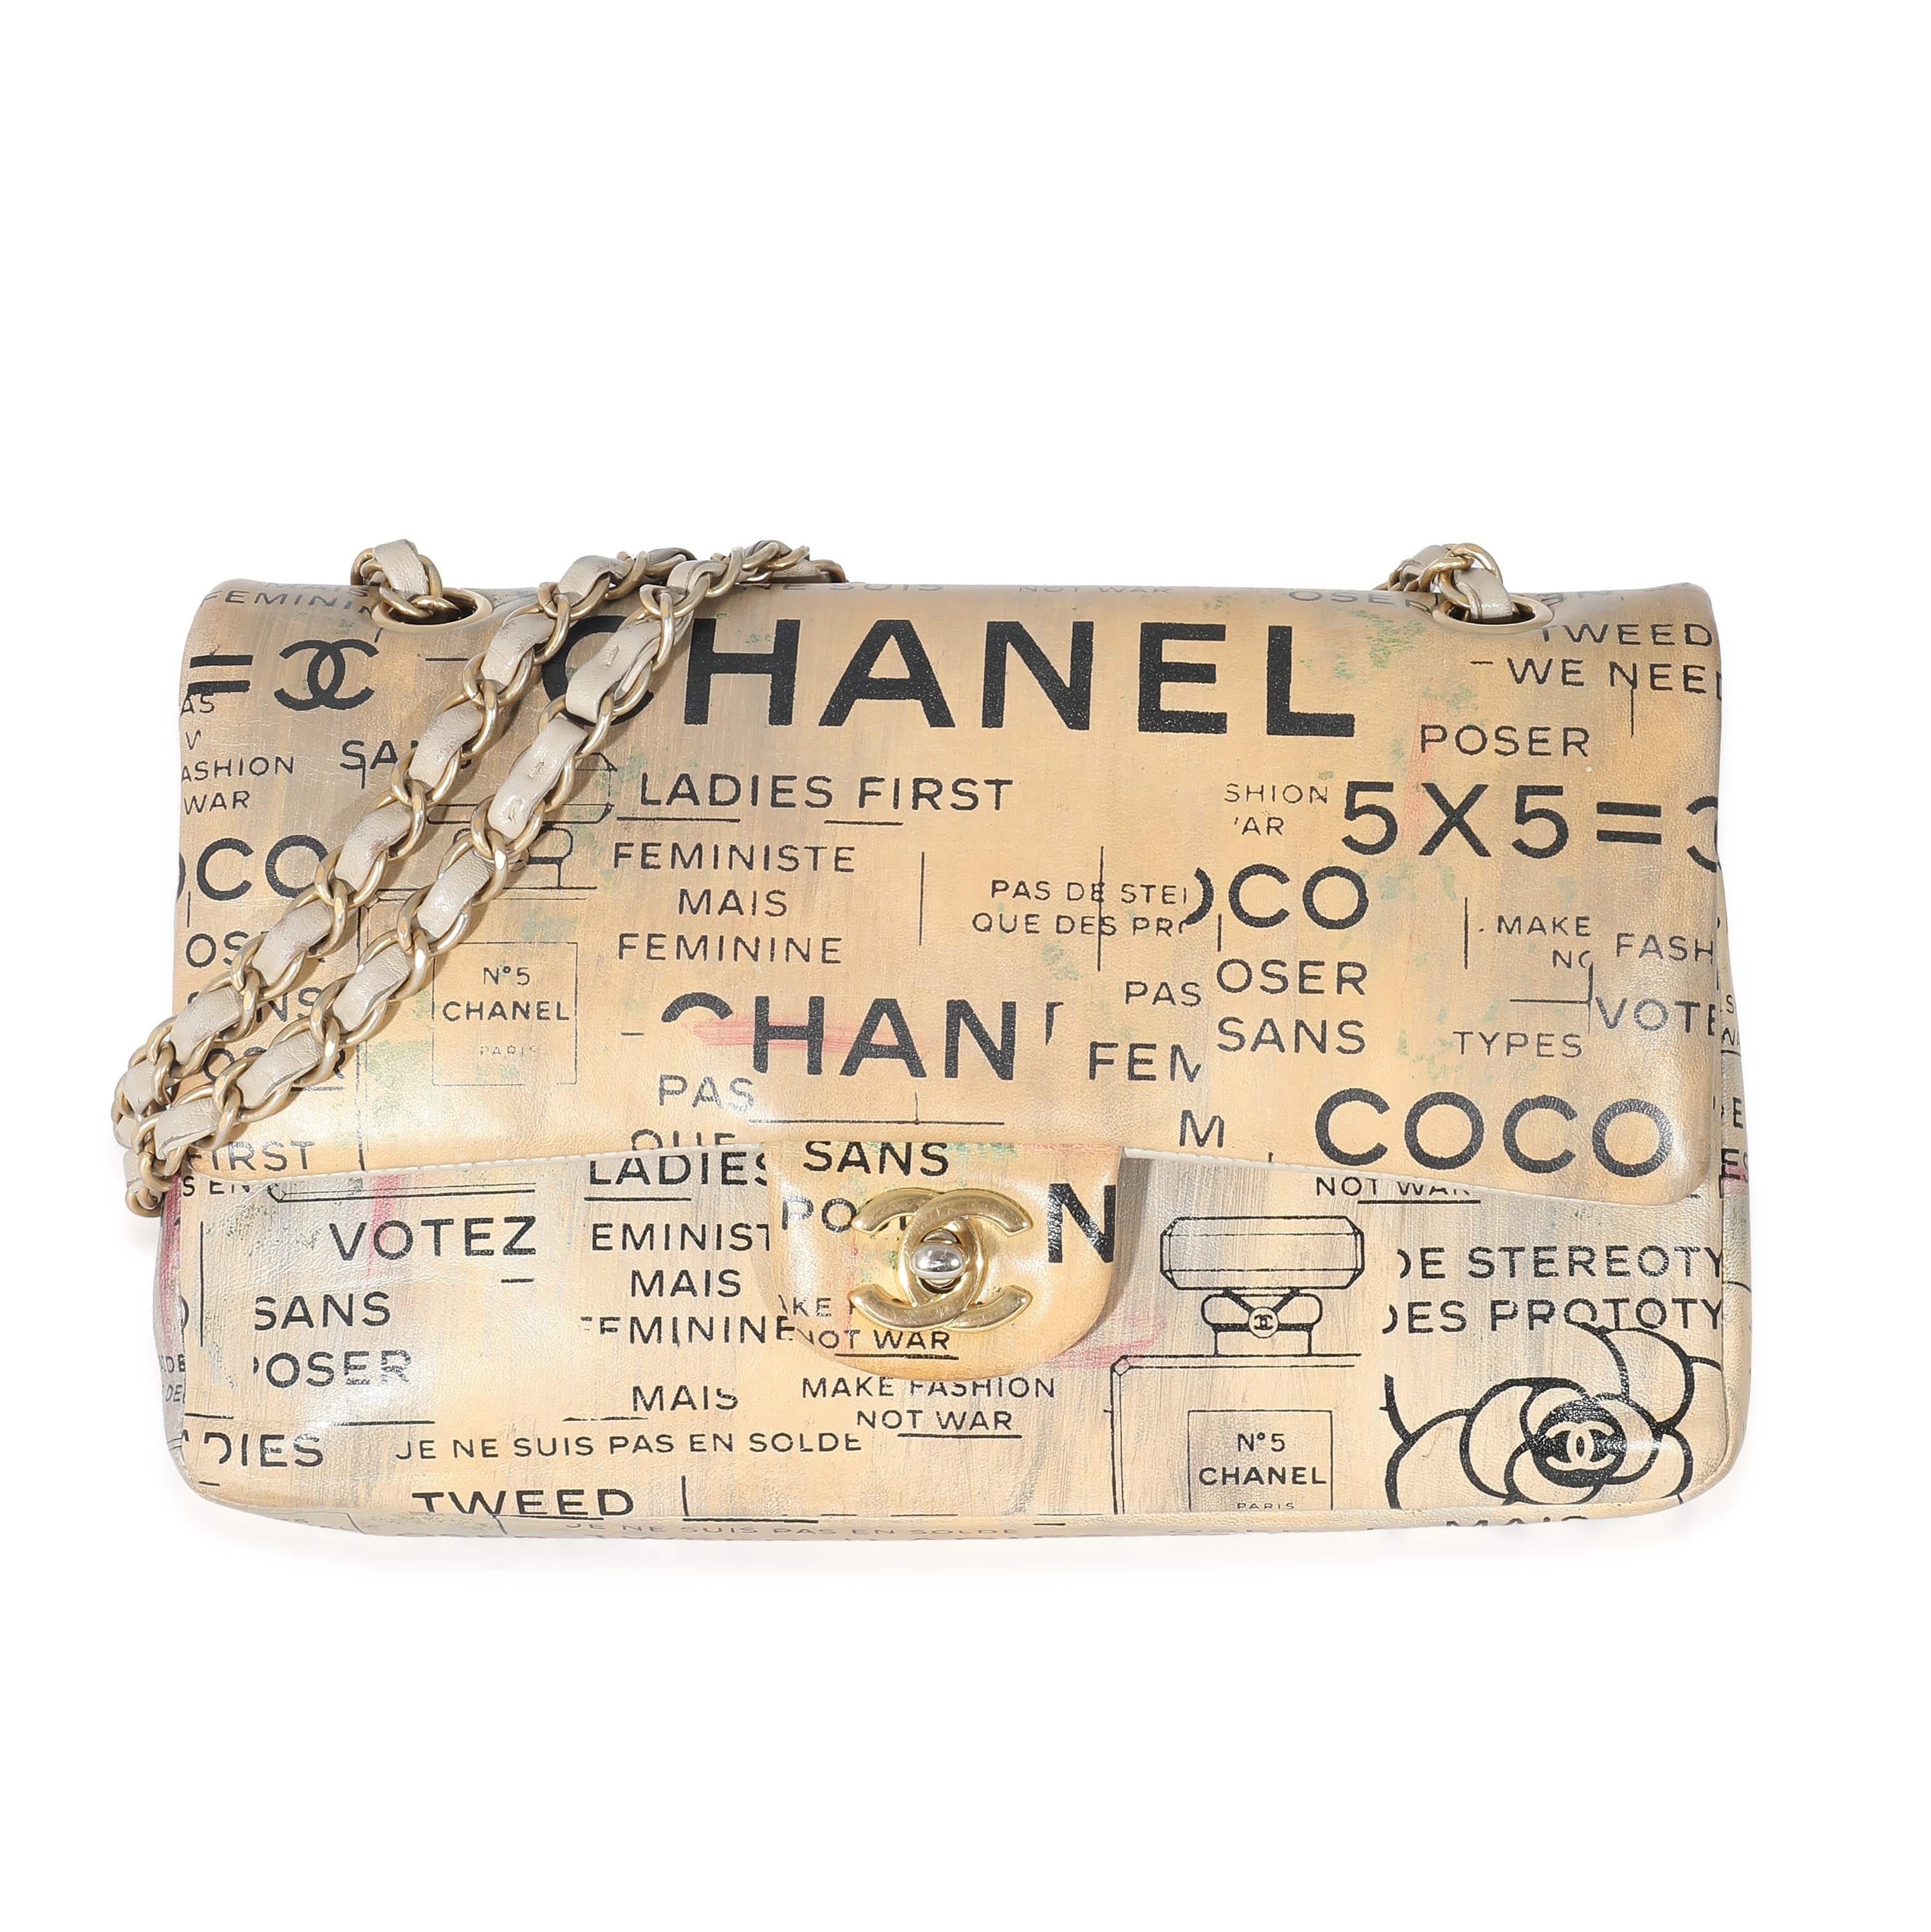 Chanel classic bag, leather feels more comfortable